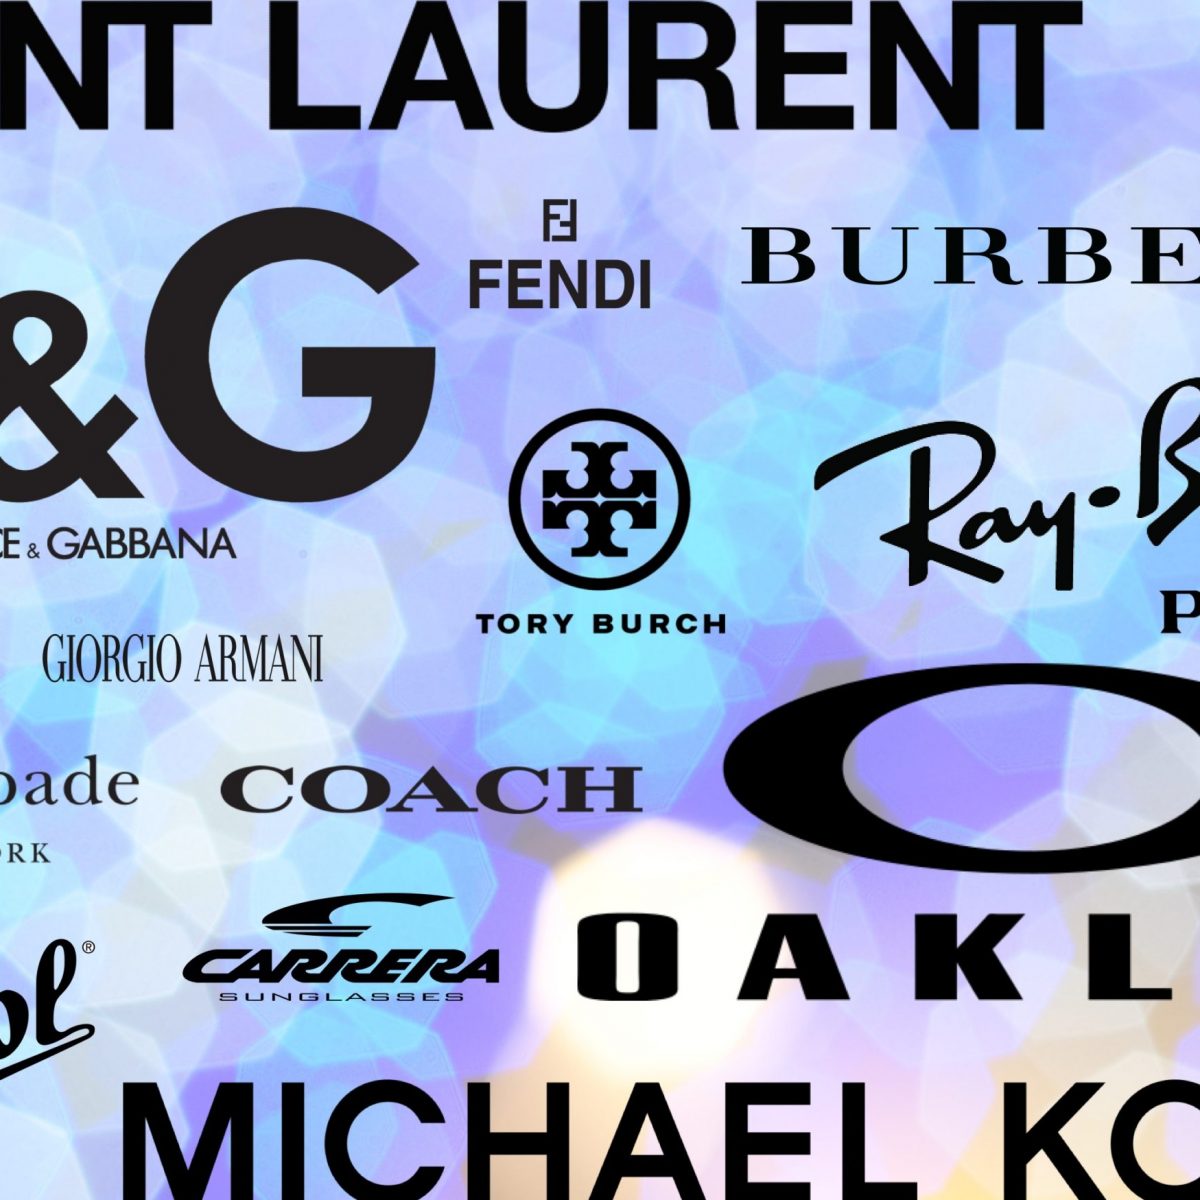 Famous Luxury Brands From Italy And Their Logos